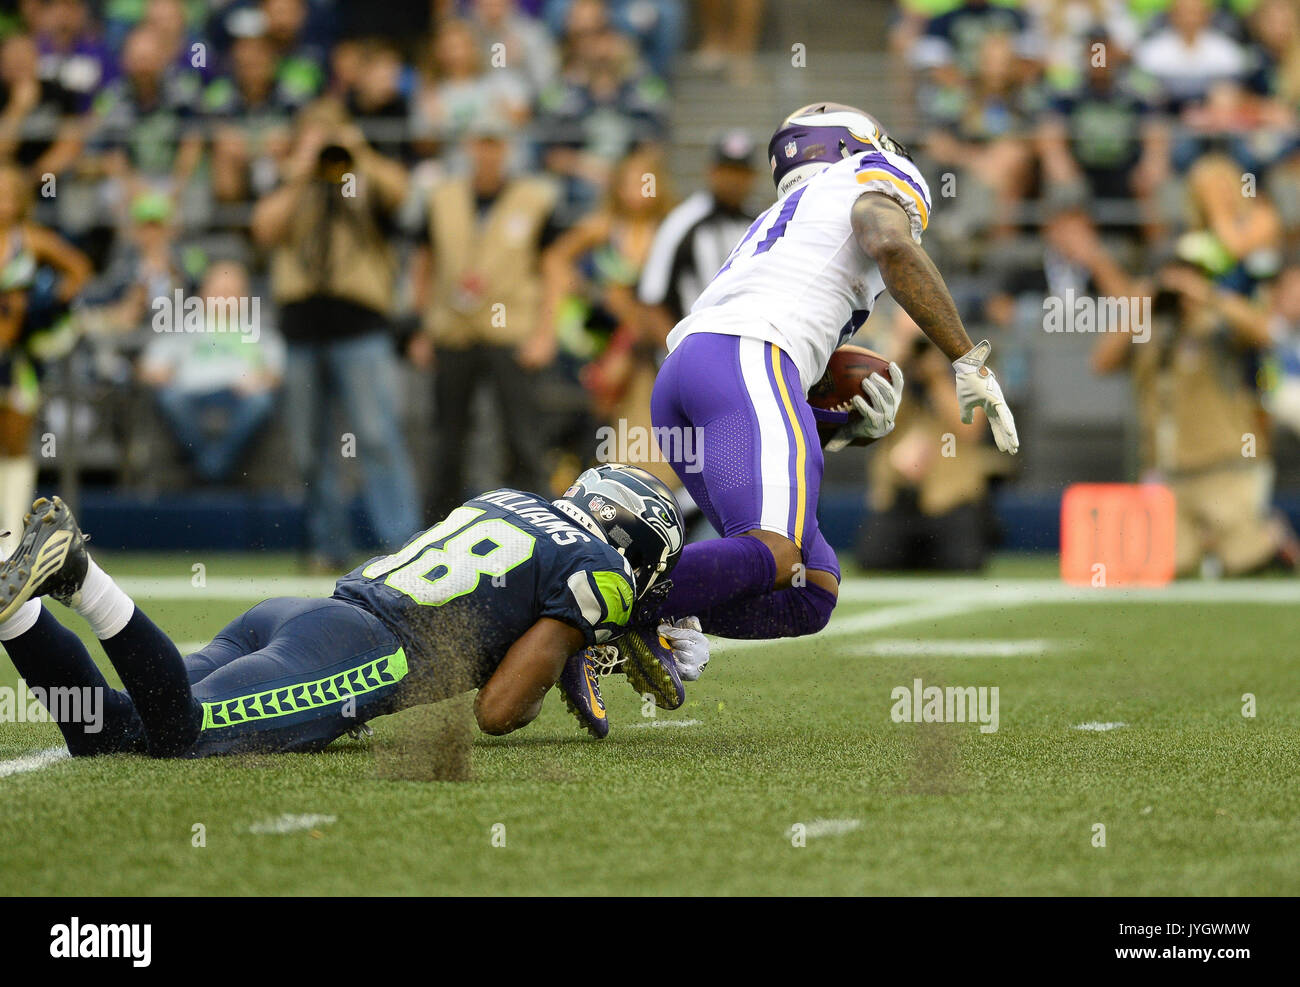 August 18, 2017: Seattle's Kasen Williams (18) tackles Minnesota's Jerick McKinnon (21) during a kick return during an NFL pre-season game between the Seattle Seahawks and the Minnesota Vikings. The game was played at Century Link Field in Seattle, WA. © Jeff Halstead / CSM Stock Photo